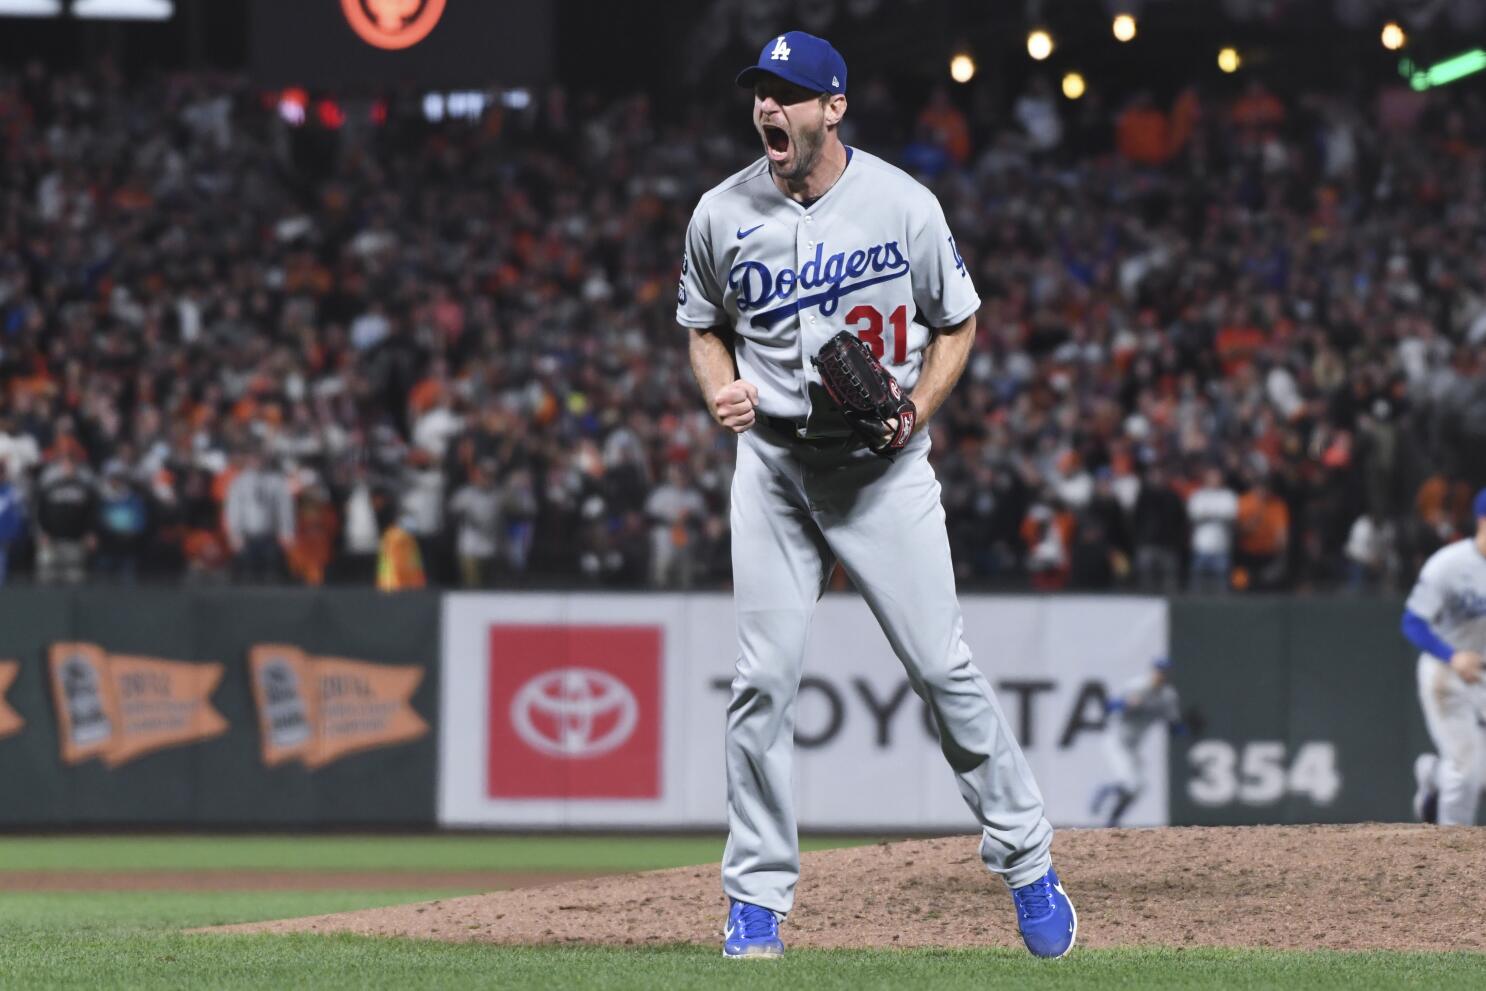 Austin Reaves will throw first pitch for Dodgers on Lakers night